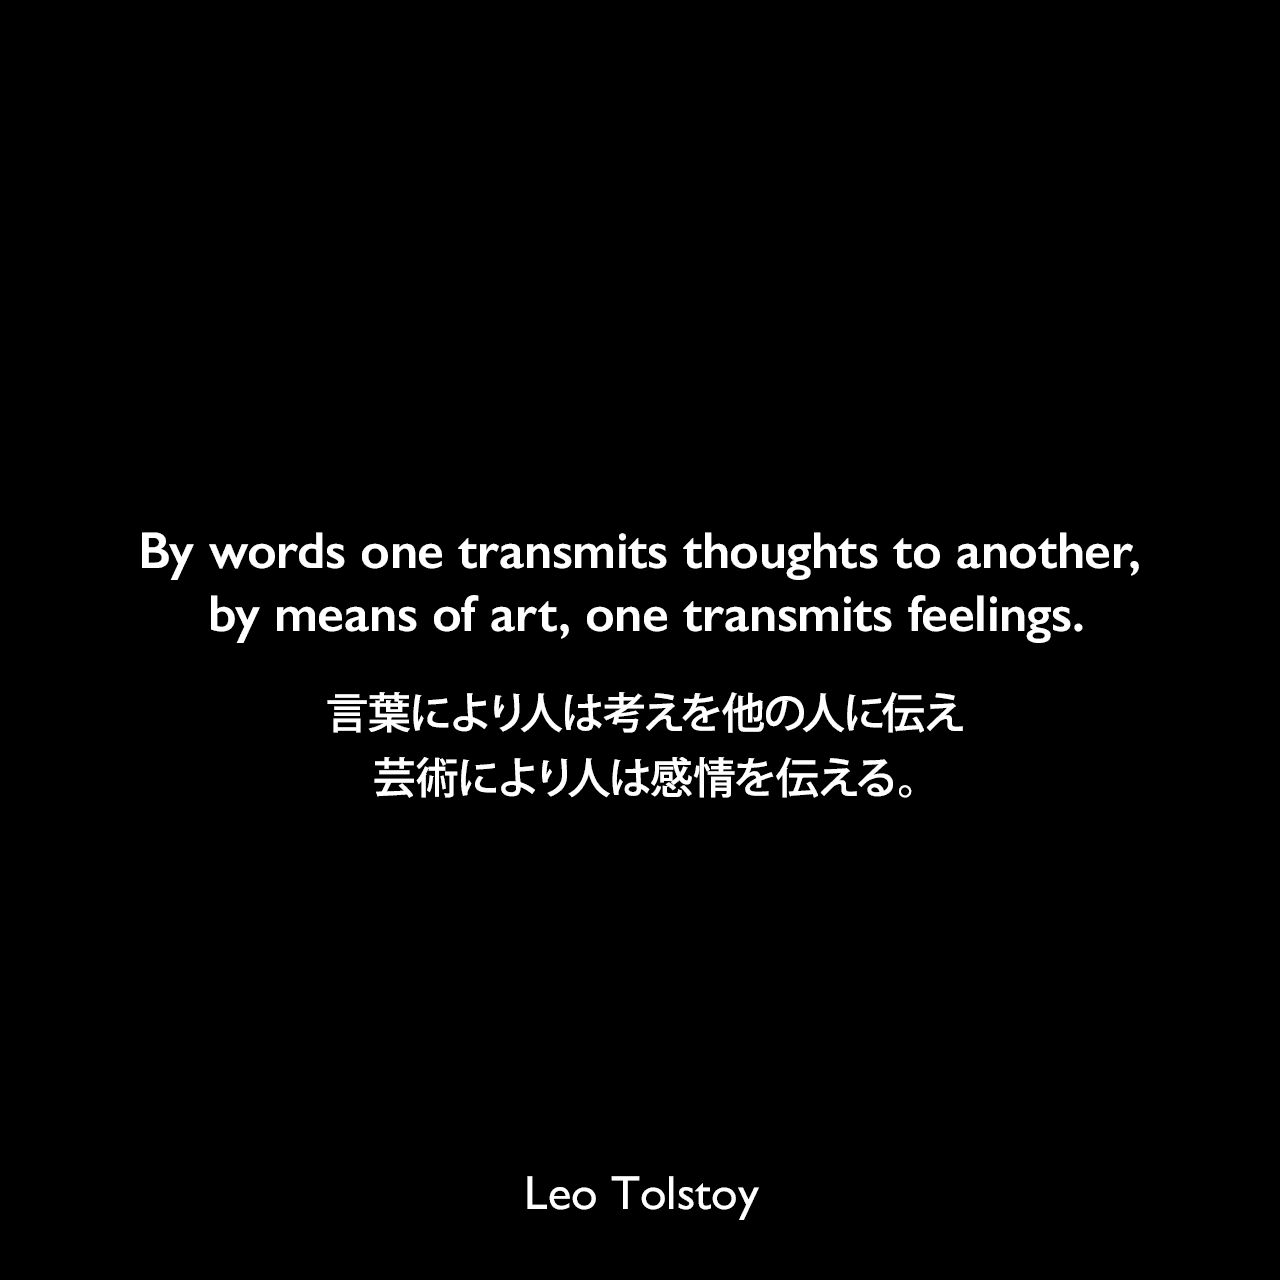 By words one transmits thoughts to another, by means of art, one transmits feelings.言葉により人は考えを他の人に伝え、芸術により人は感情を伝える。- トルストイによる本「芸術とは何か」よりLeo Tolstoy